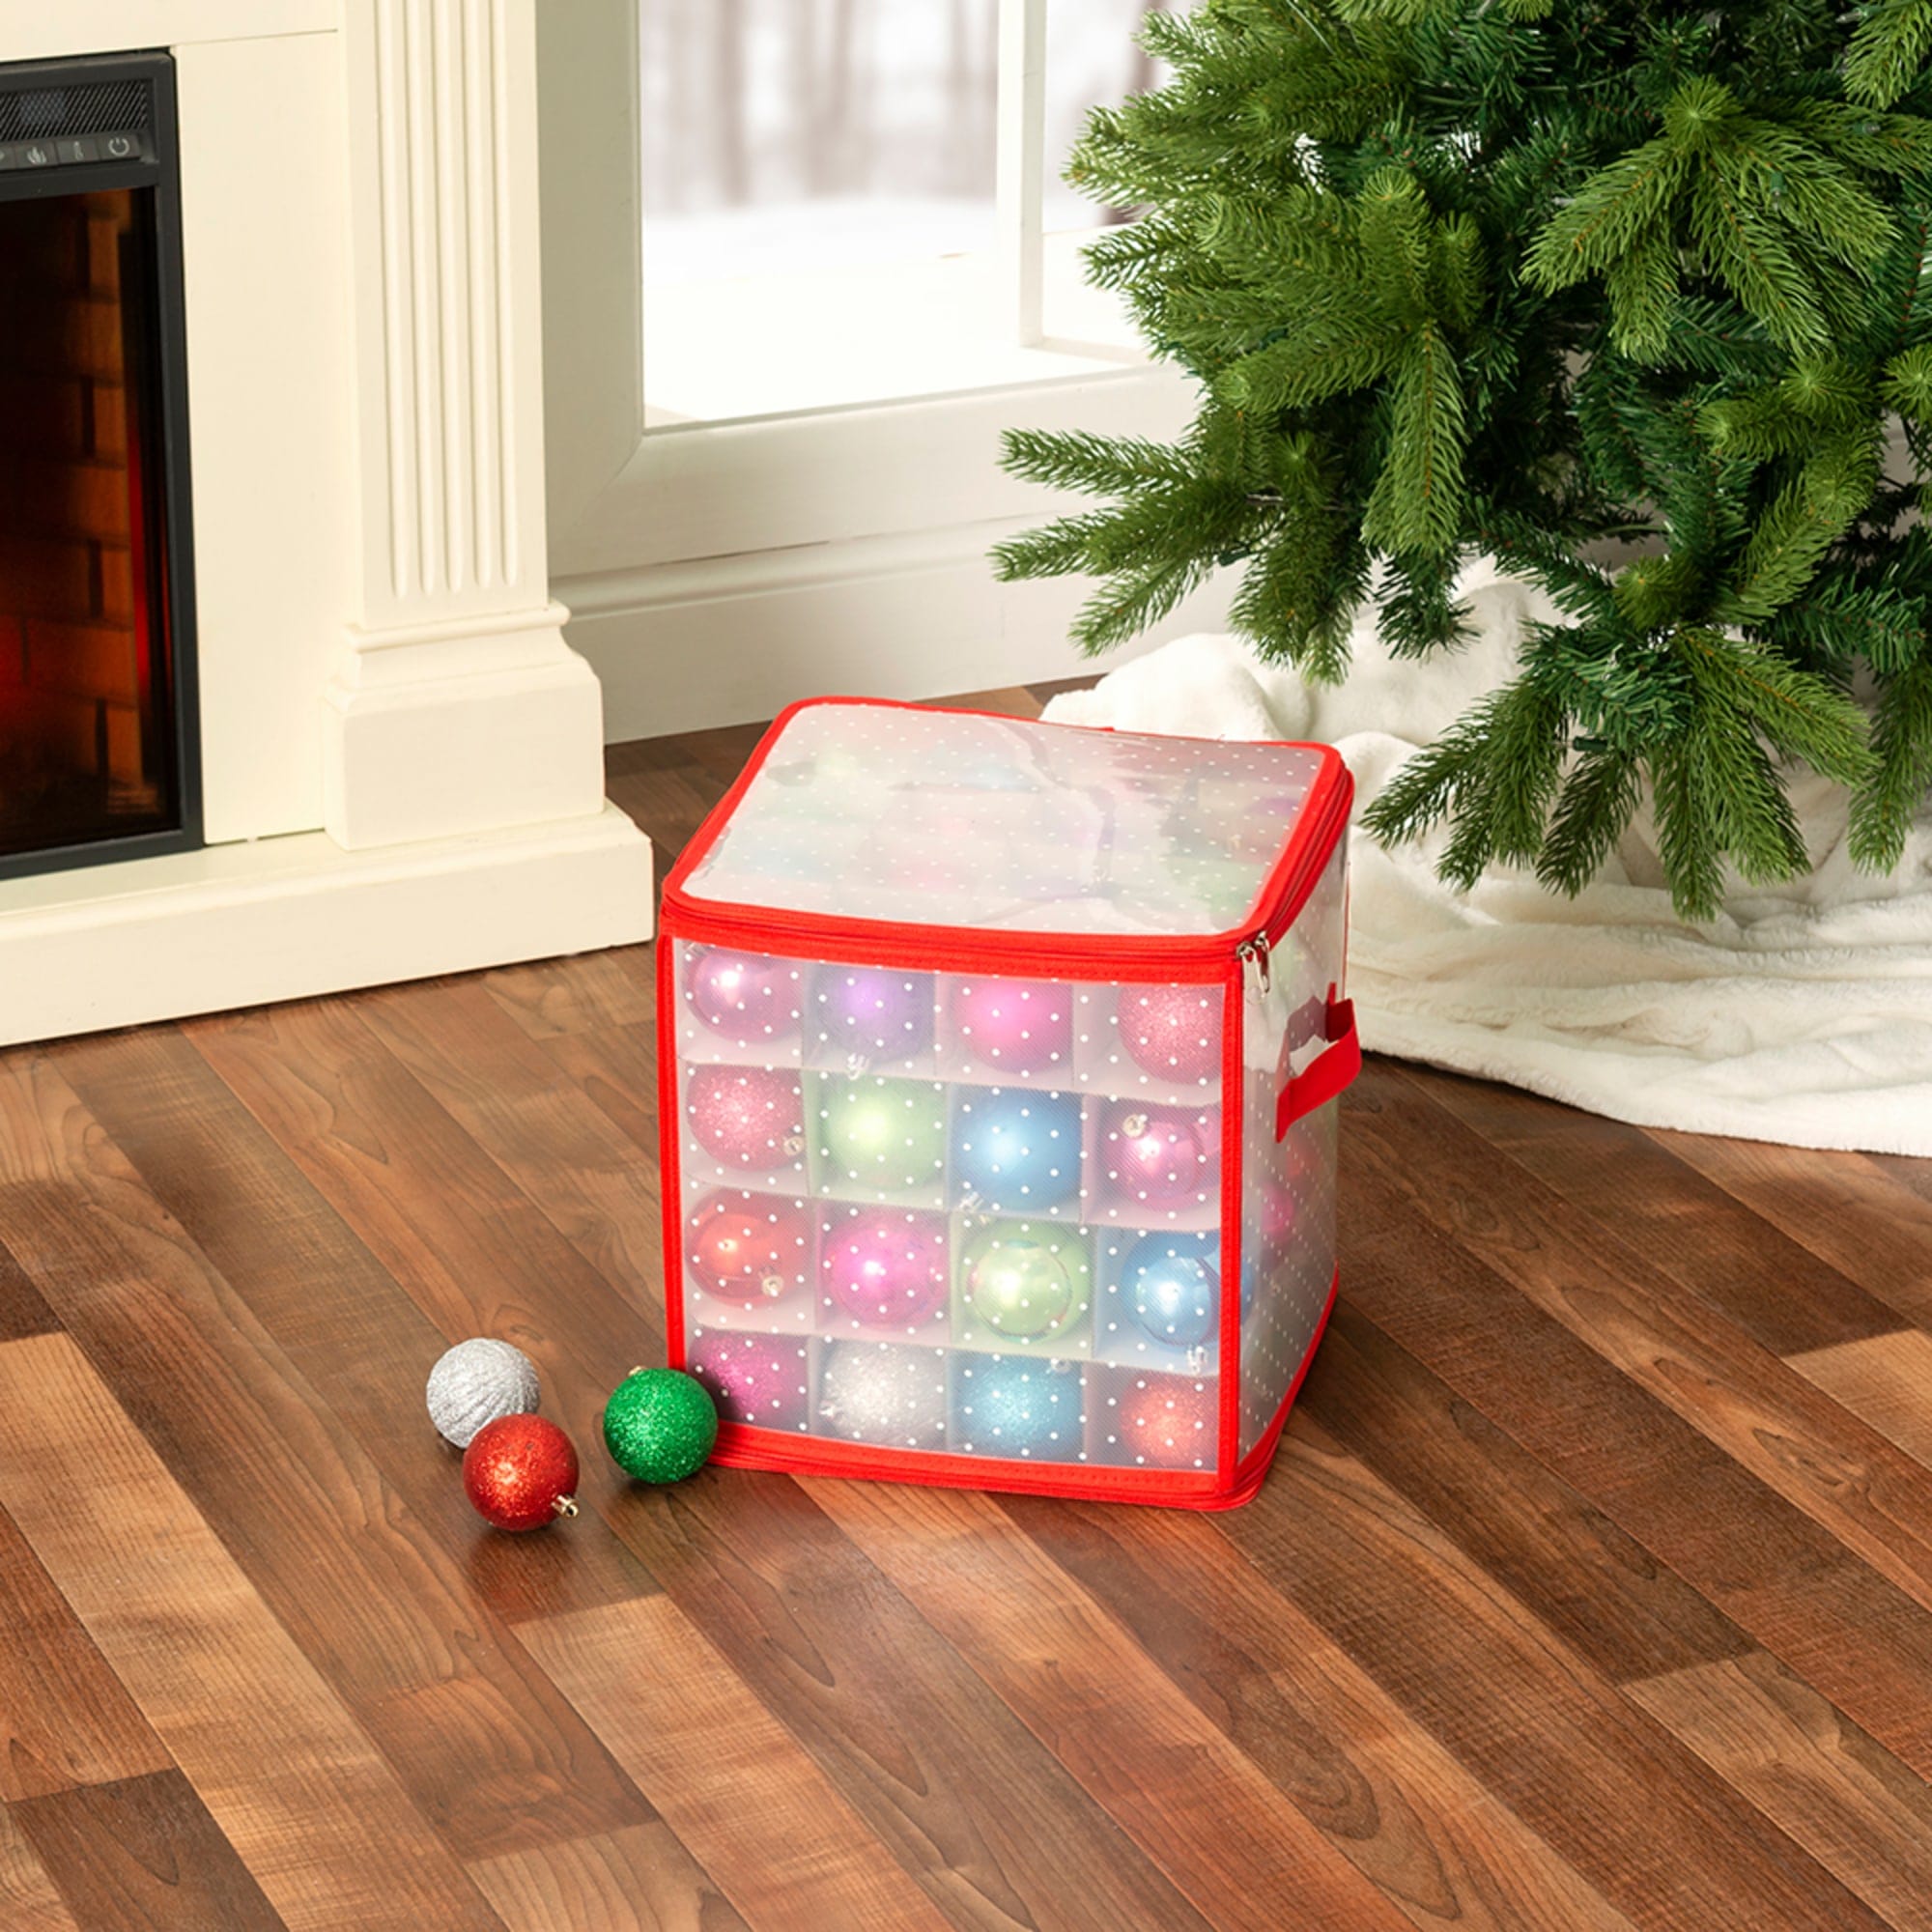 Simplify Ornament Organizer in Red (64-Count) 9002-RED - The Home